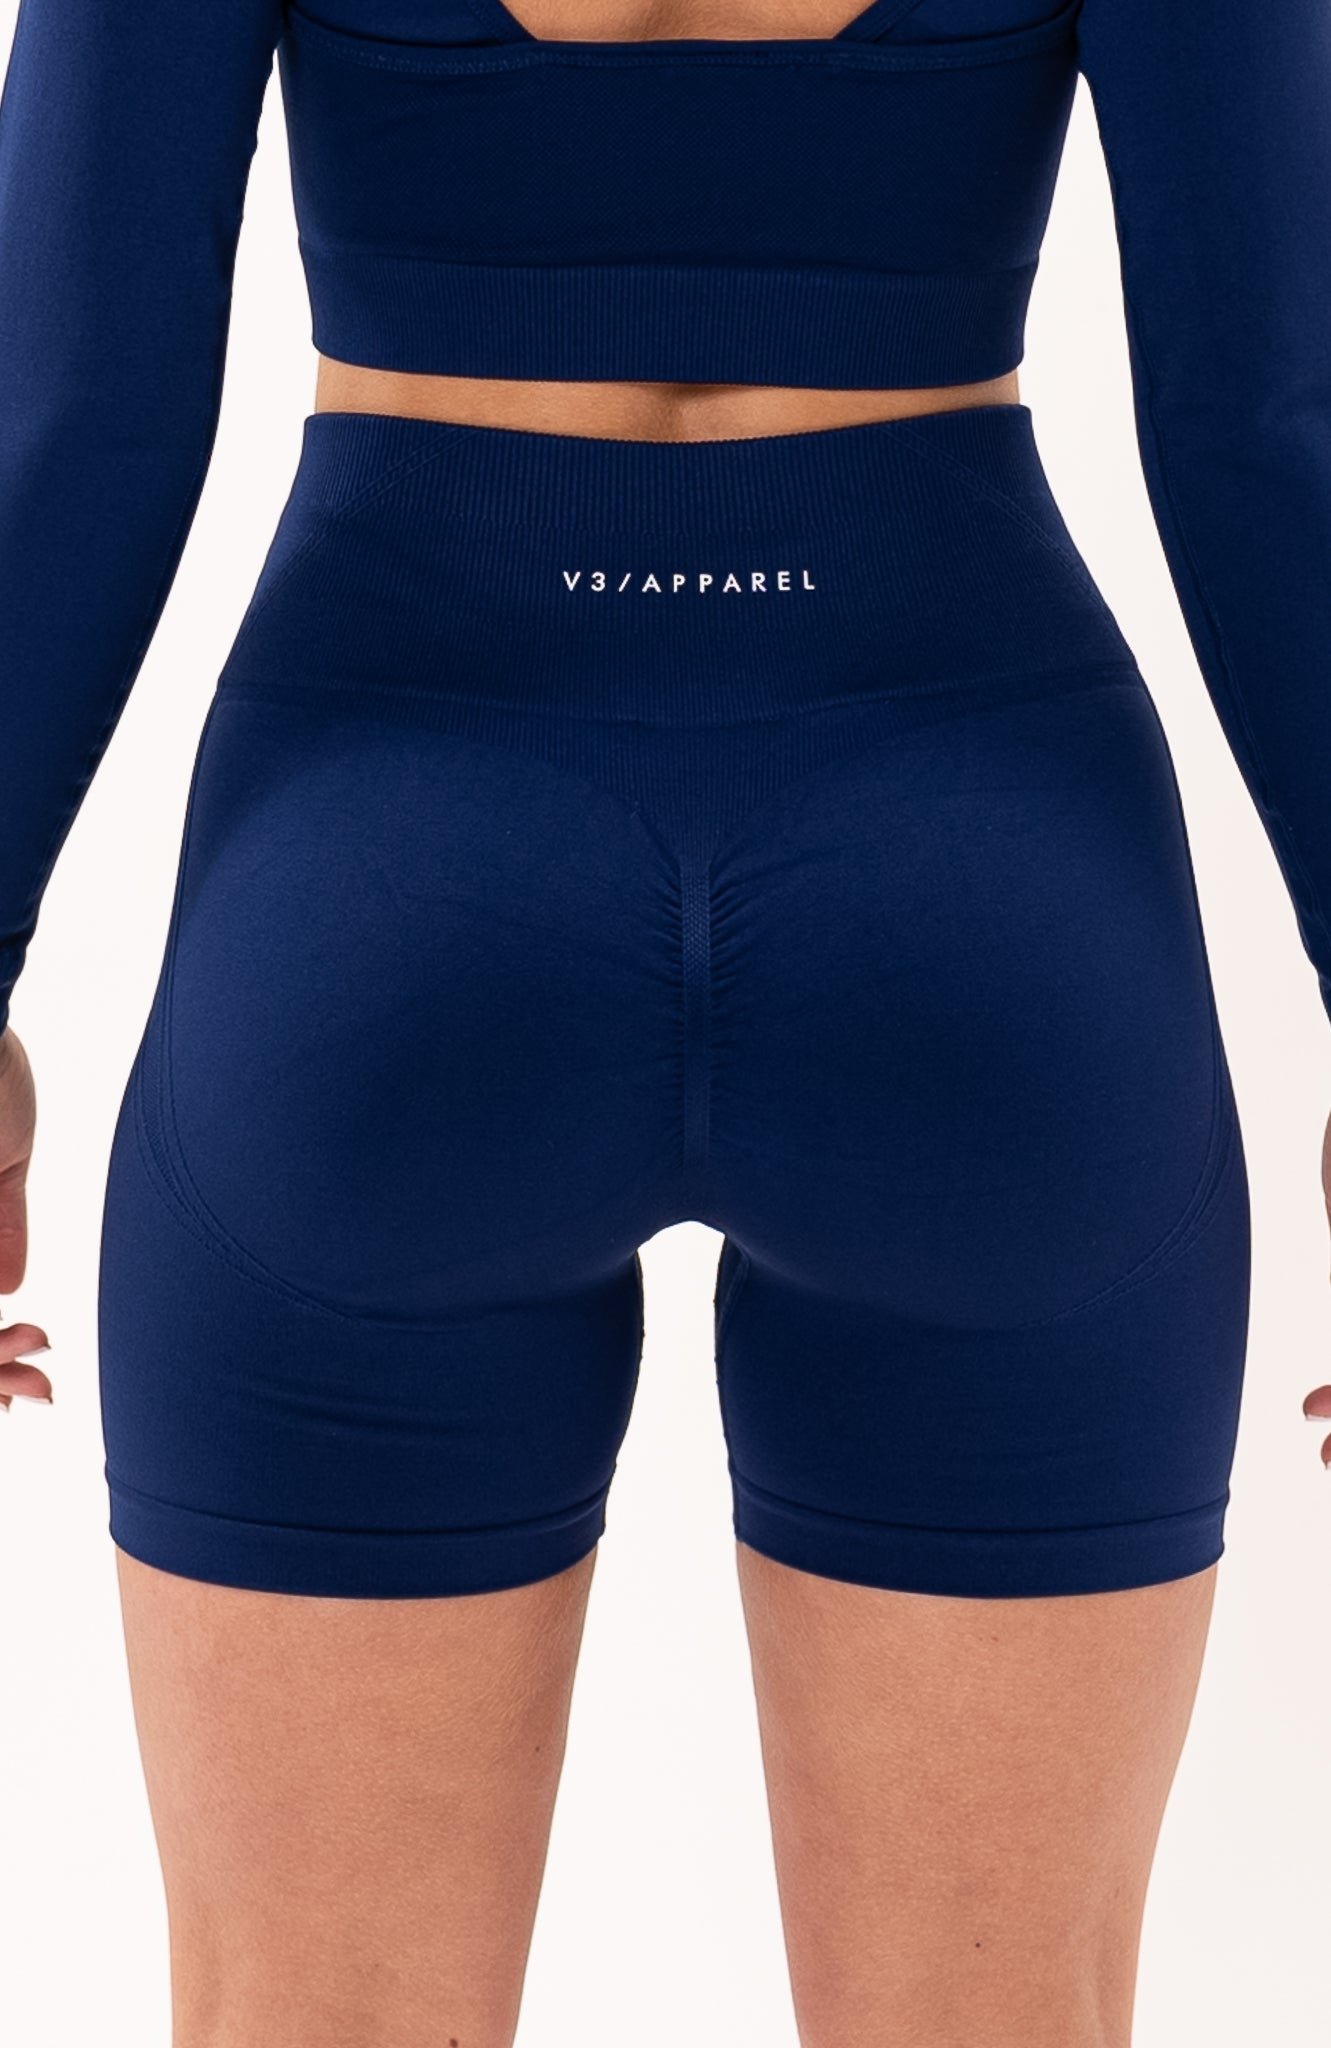 V3 Apparel Women's Tempo seamless scrunch bum shaping high waisted cycle shorts in navy royal blue – Squat proof 5 inch leg gym shorts for workouts training, Running, yoga, bodybuilding and bikini fitness.